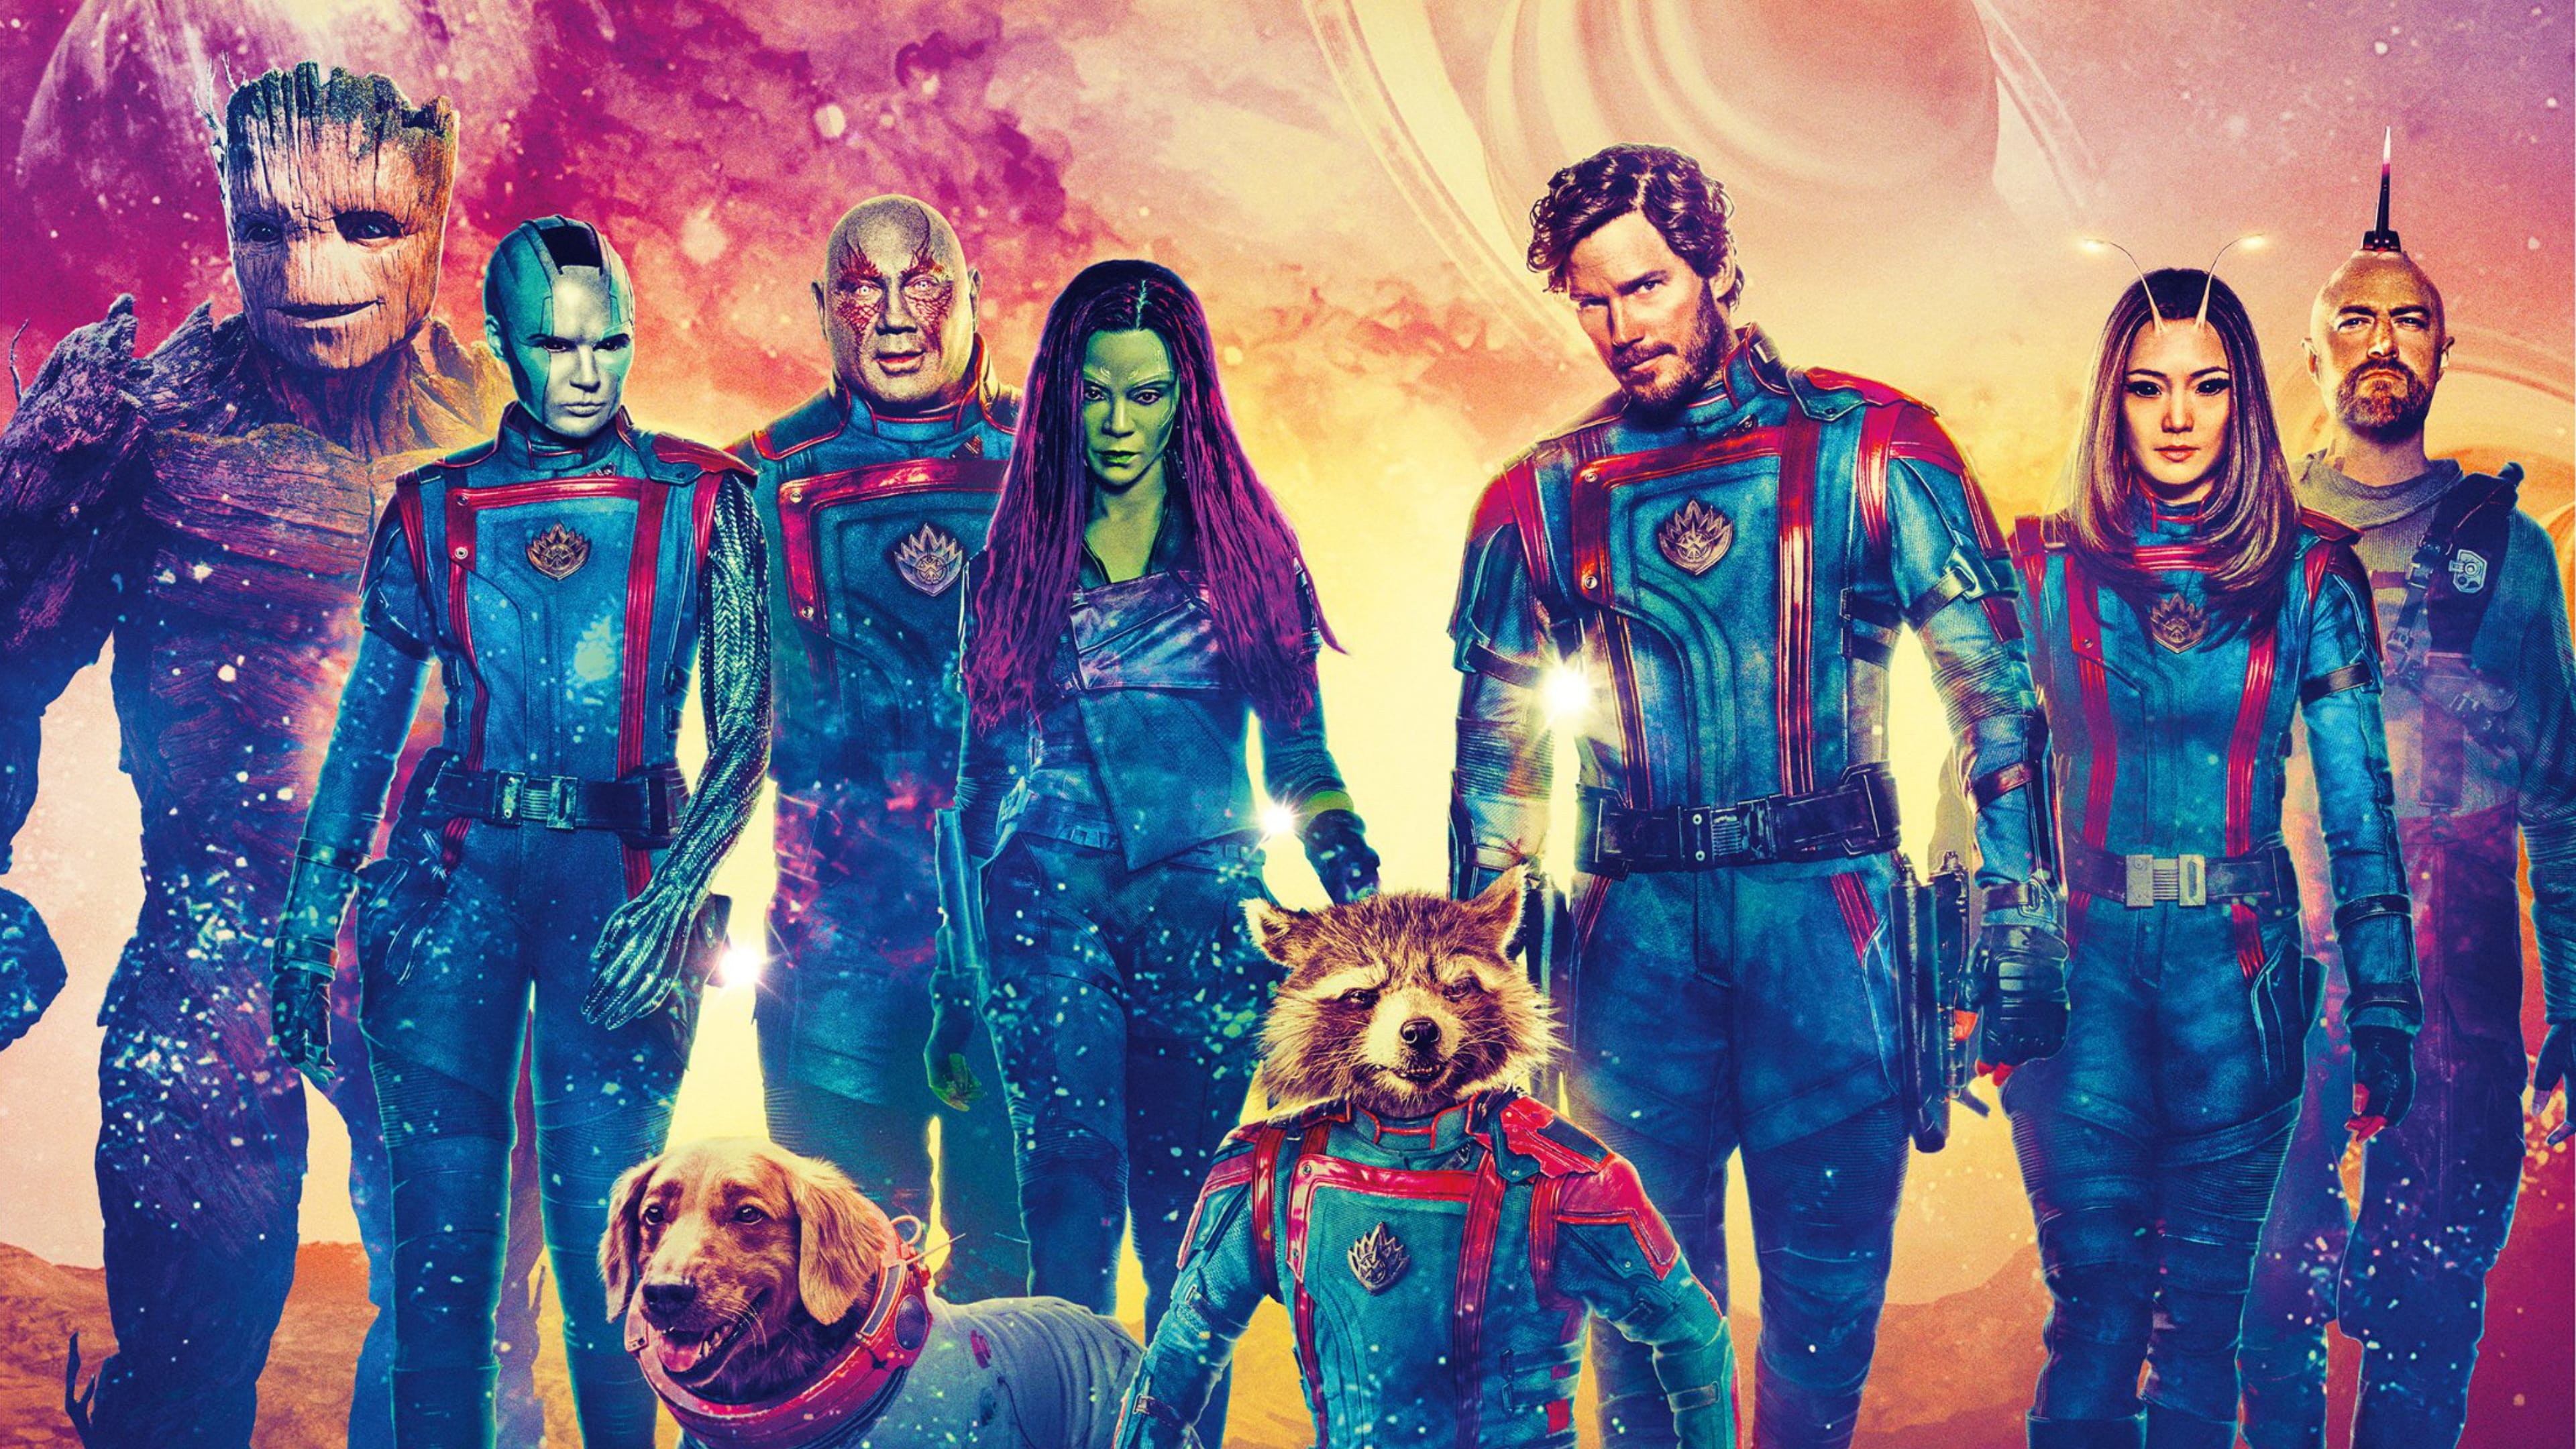 Guardians of the Galaxy Vol. 3 (2023) English and Hindi Watch Online and Download